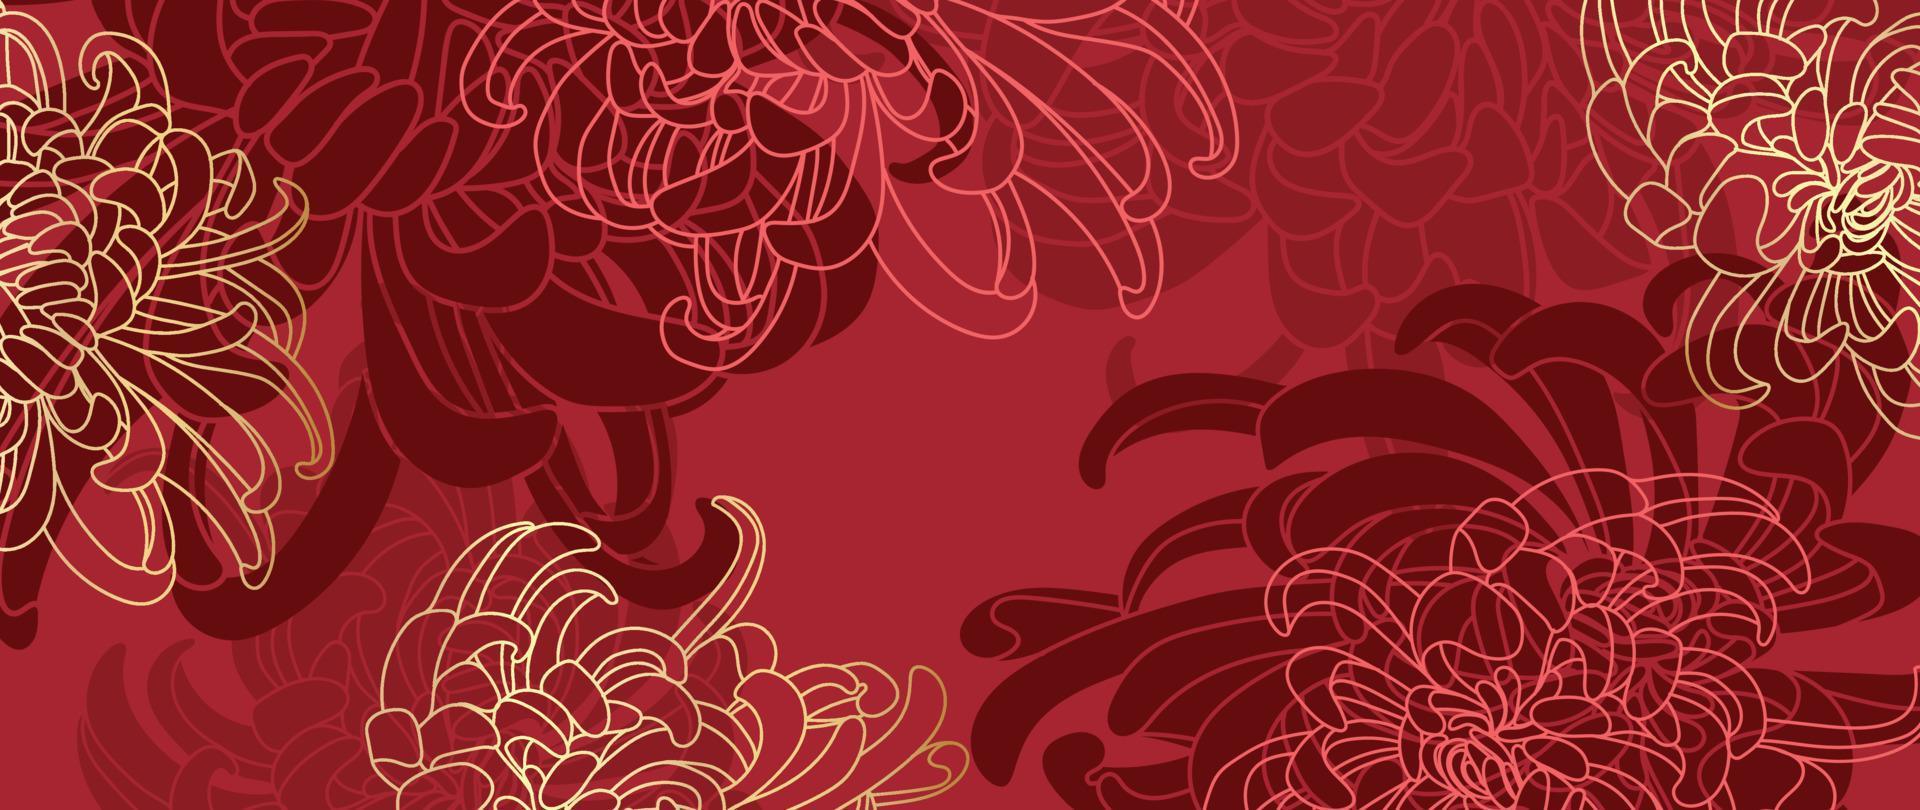 Happy Chinese new year luxury style pattern background vector. Oriental mums flower line art with gold and red color texture. Design illustration for wallpaper, card, poster, packaging, advertising. vector